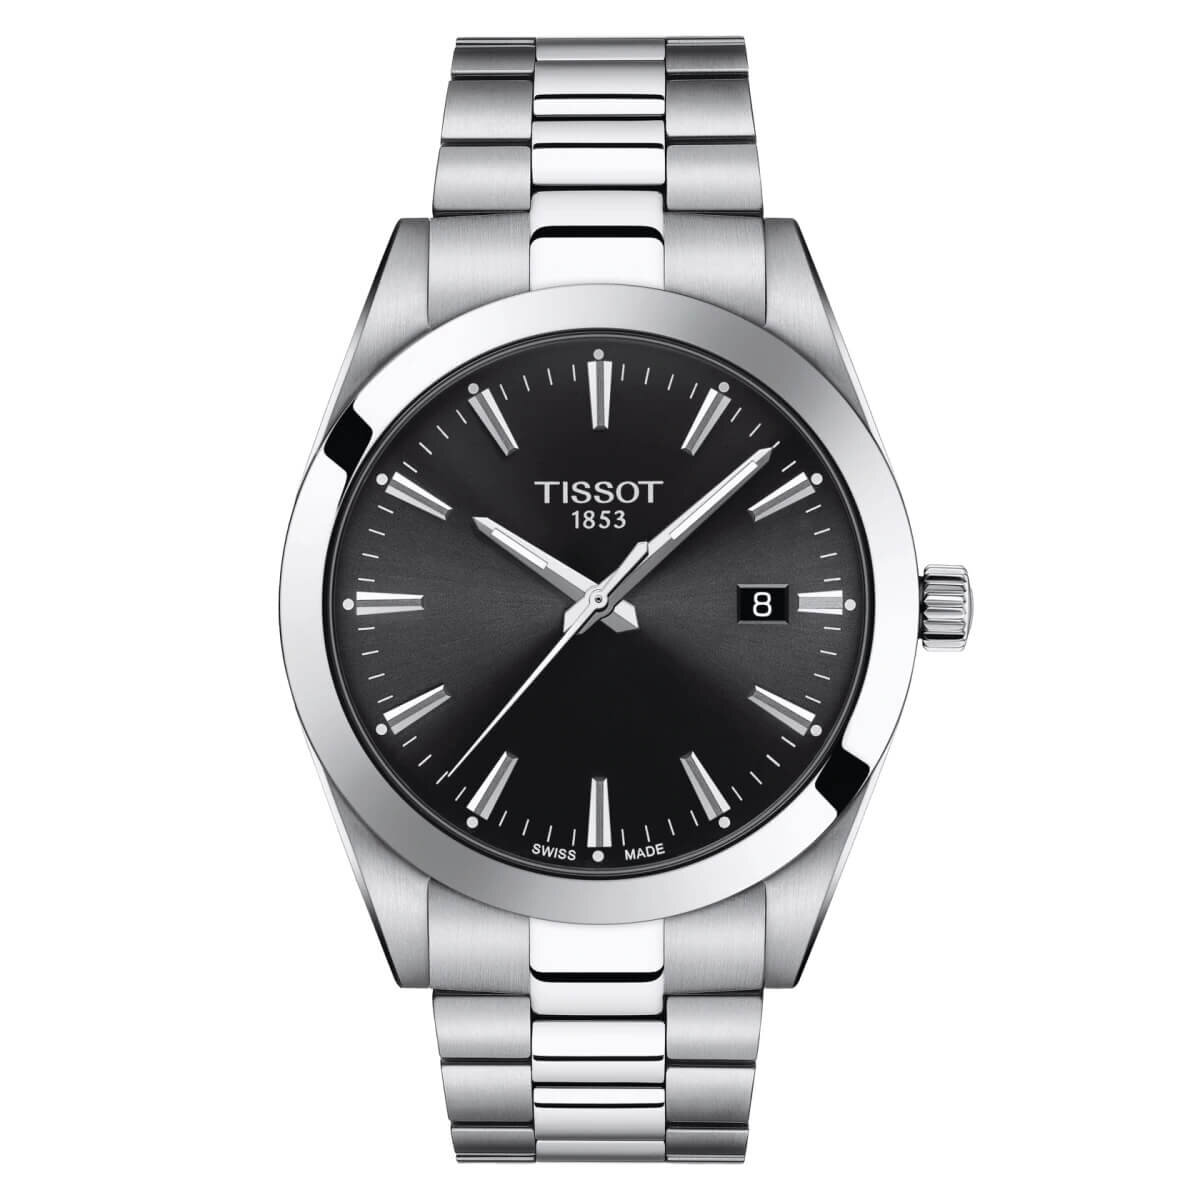 watches similar to datejust